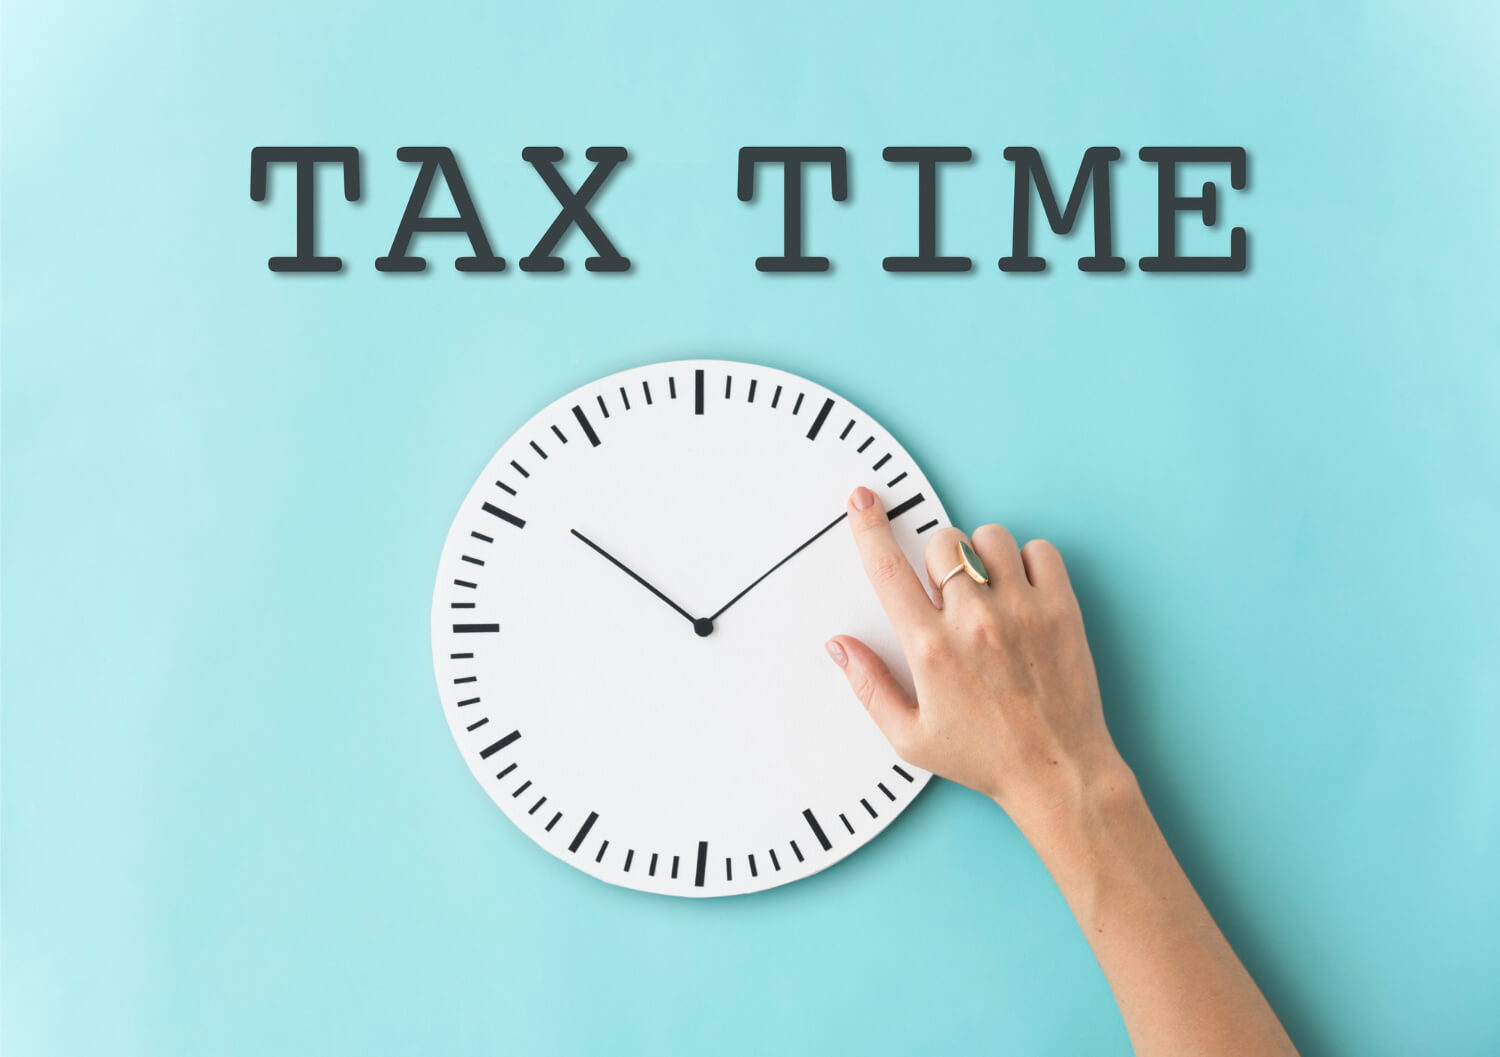 tax time reminder concept on a bluish background